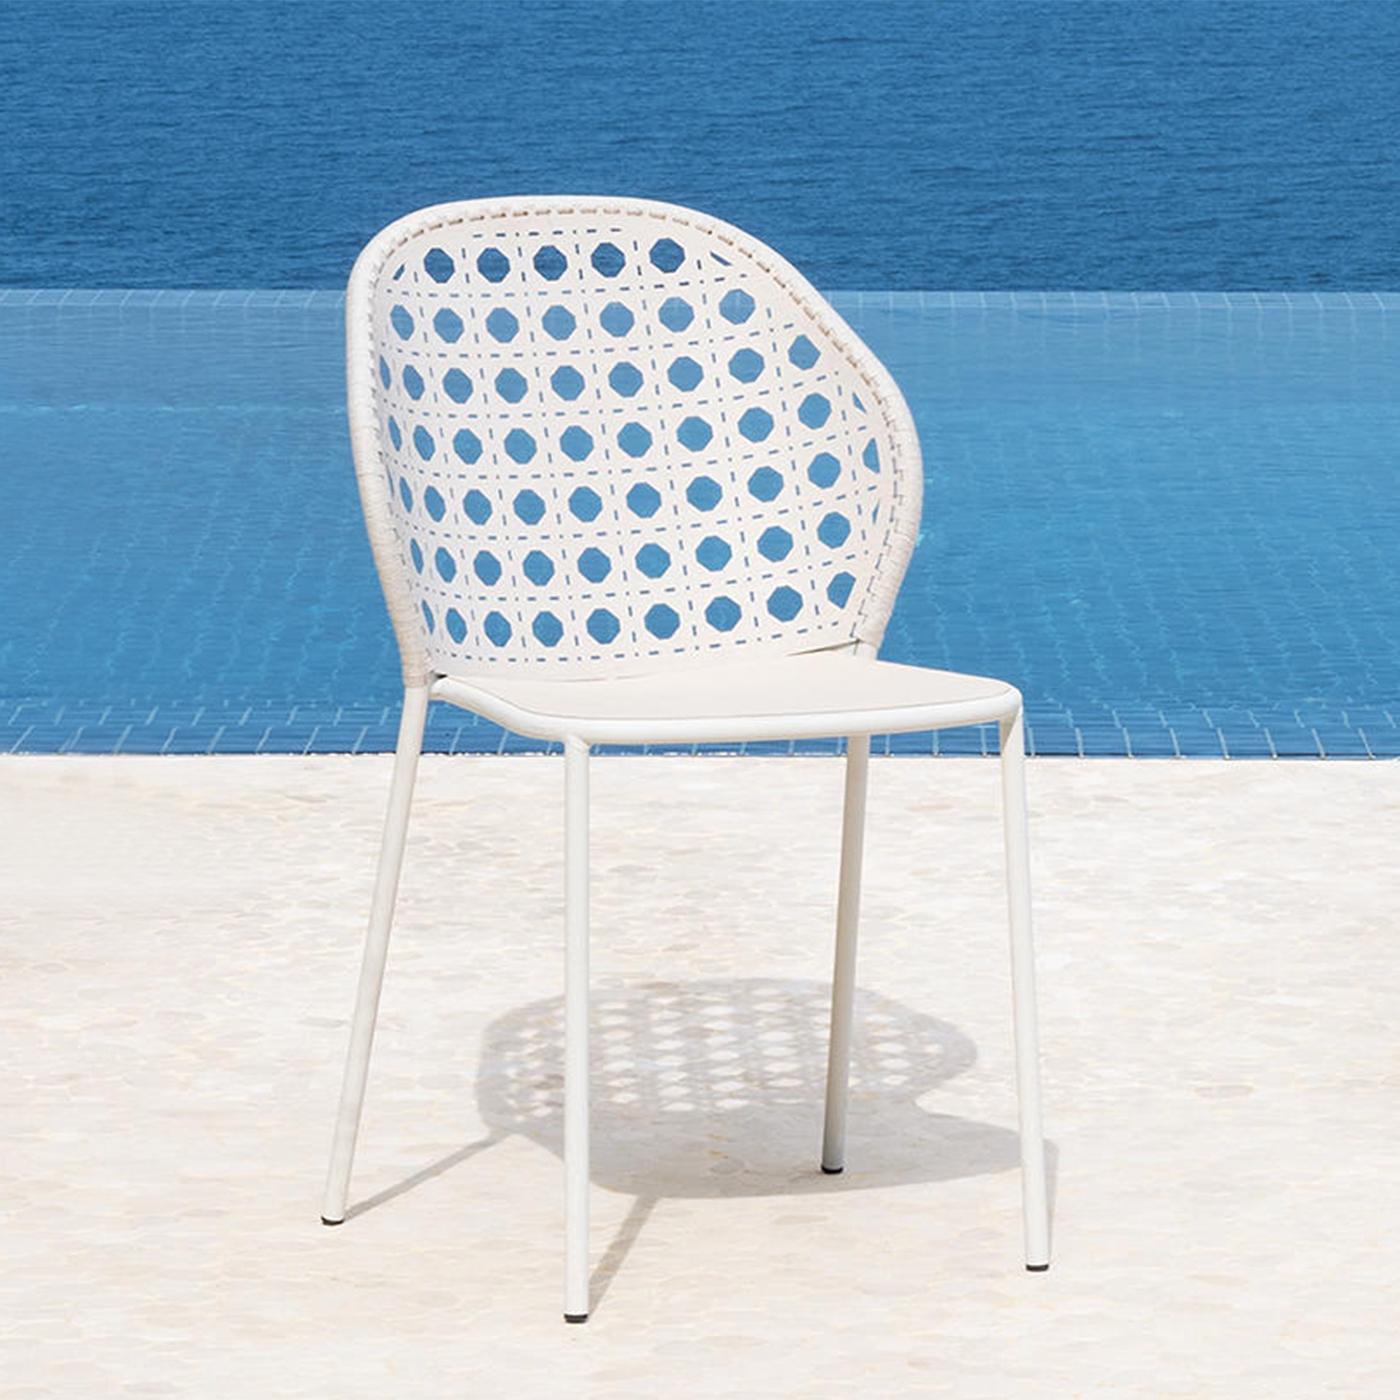 Chair Vick Outdoor with frame structure in stainless steel
in white finish, chair with seat and backrest made in outdoor 
wood in white finish. Stackable chairs.
Also available on request in coral finish.